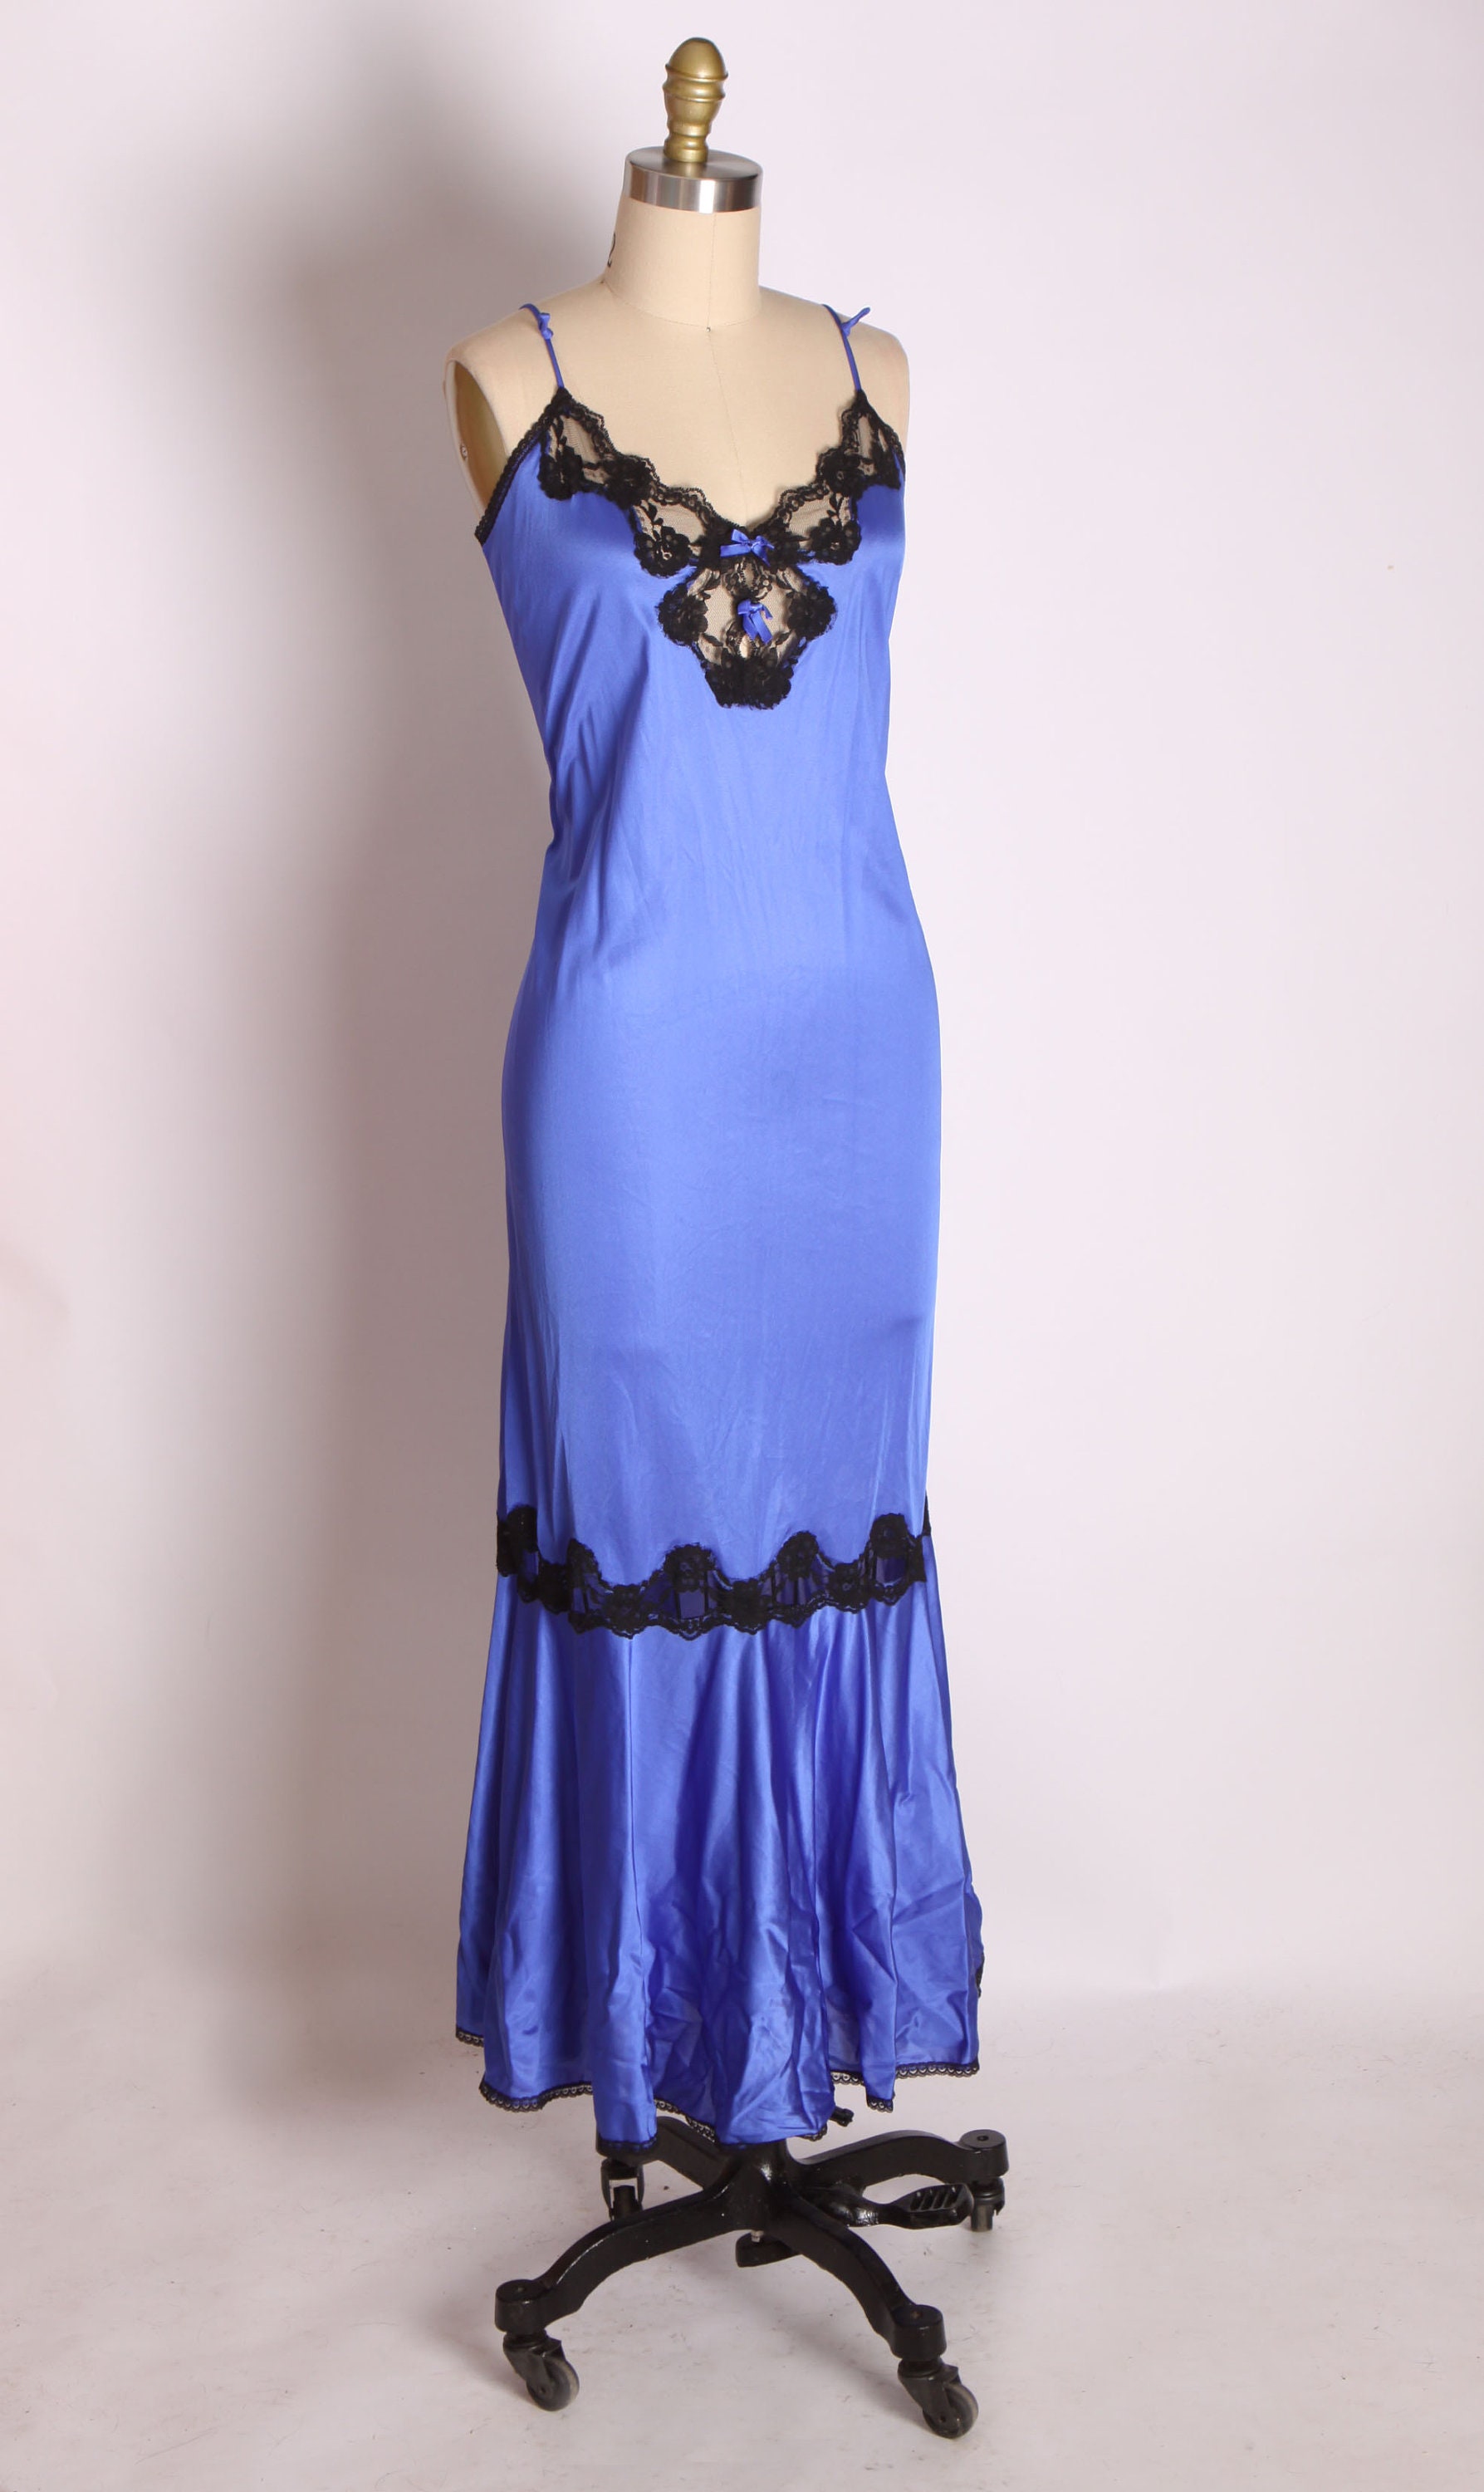 1970s Electric Blue Nylon and Black Lace Spaghetti Strap Lingerie Gown -S